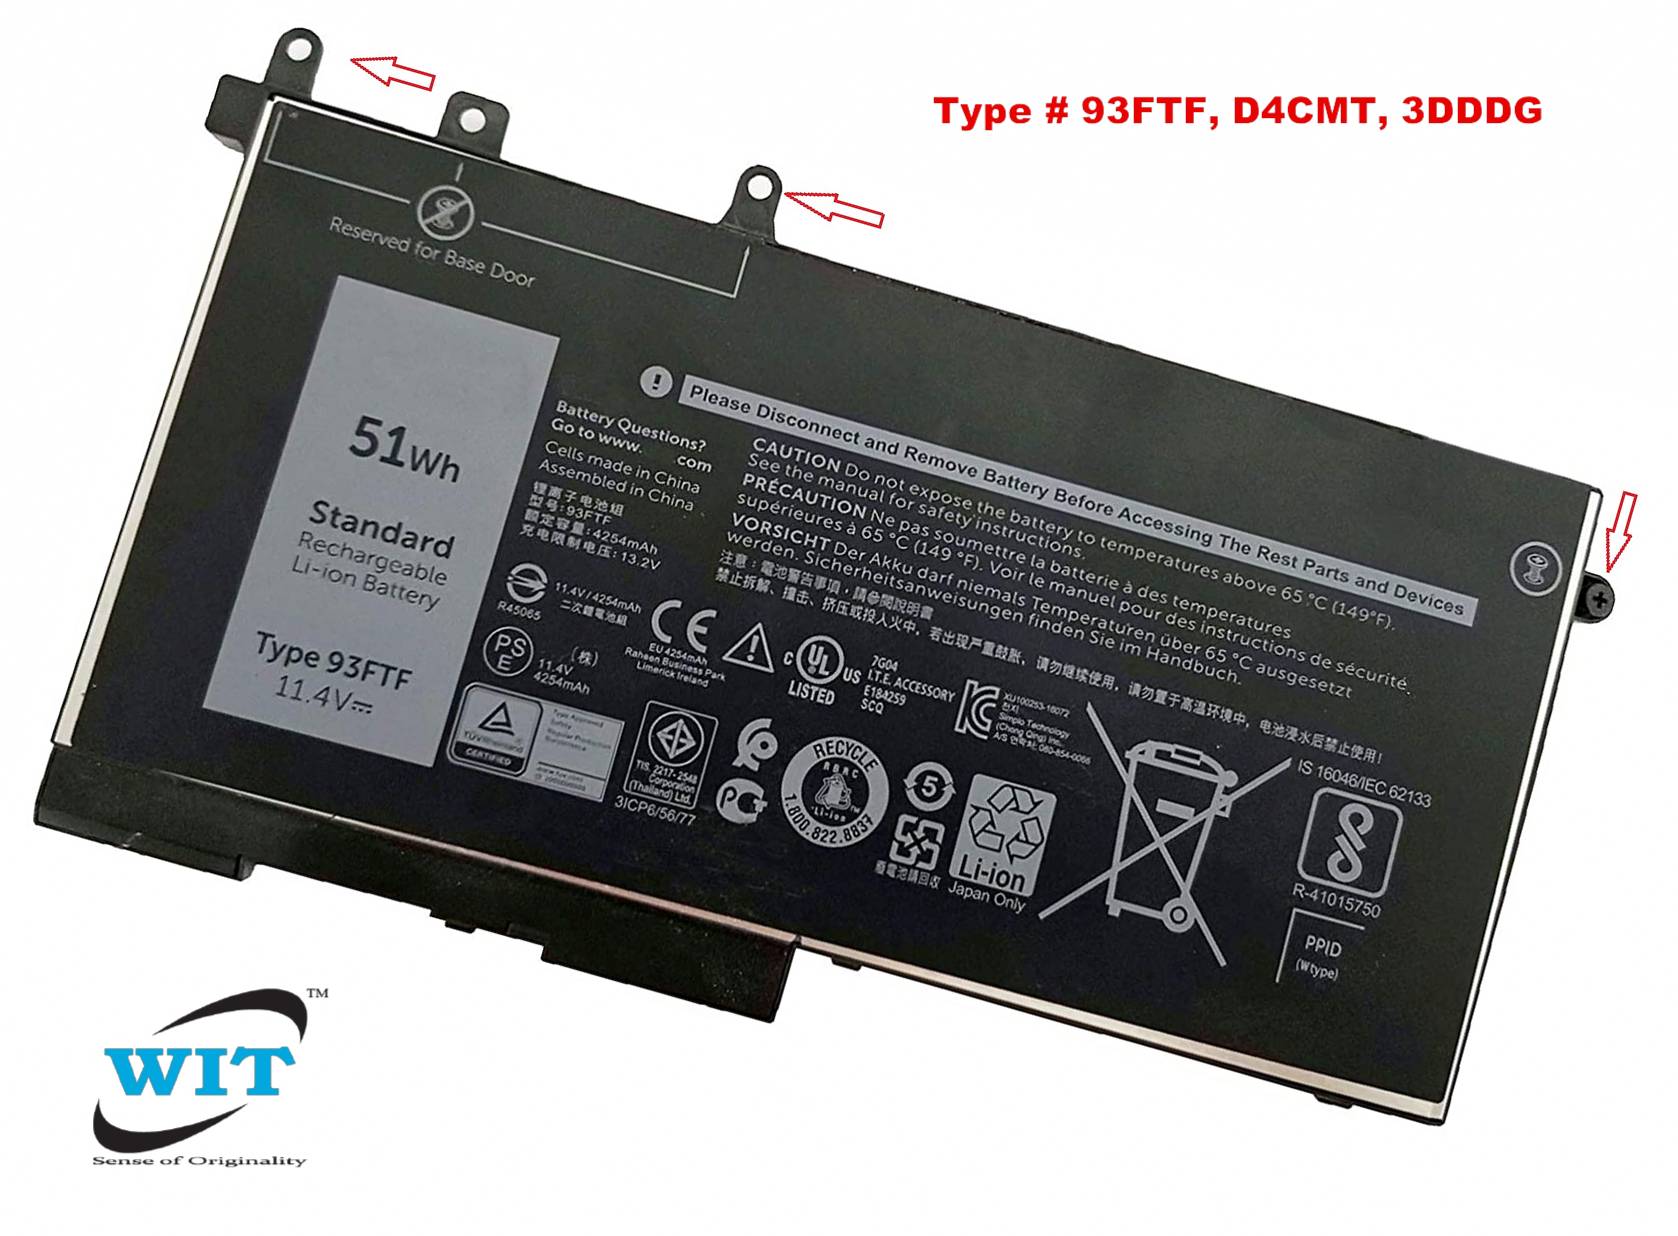 Dell Latitude E5280 E5480 E5490 E5580 E5590 E5491 E5591,Dell Latitude 5280  5288 5290 5480 5488 5490 5491 5495 5580 5590 5591 Series, Dell Precision  3520 3530 Series , Battery Type : 93FTF, D4CMT, 3DDDG internal Li-Polymer  Battery - WIT Computers